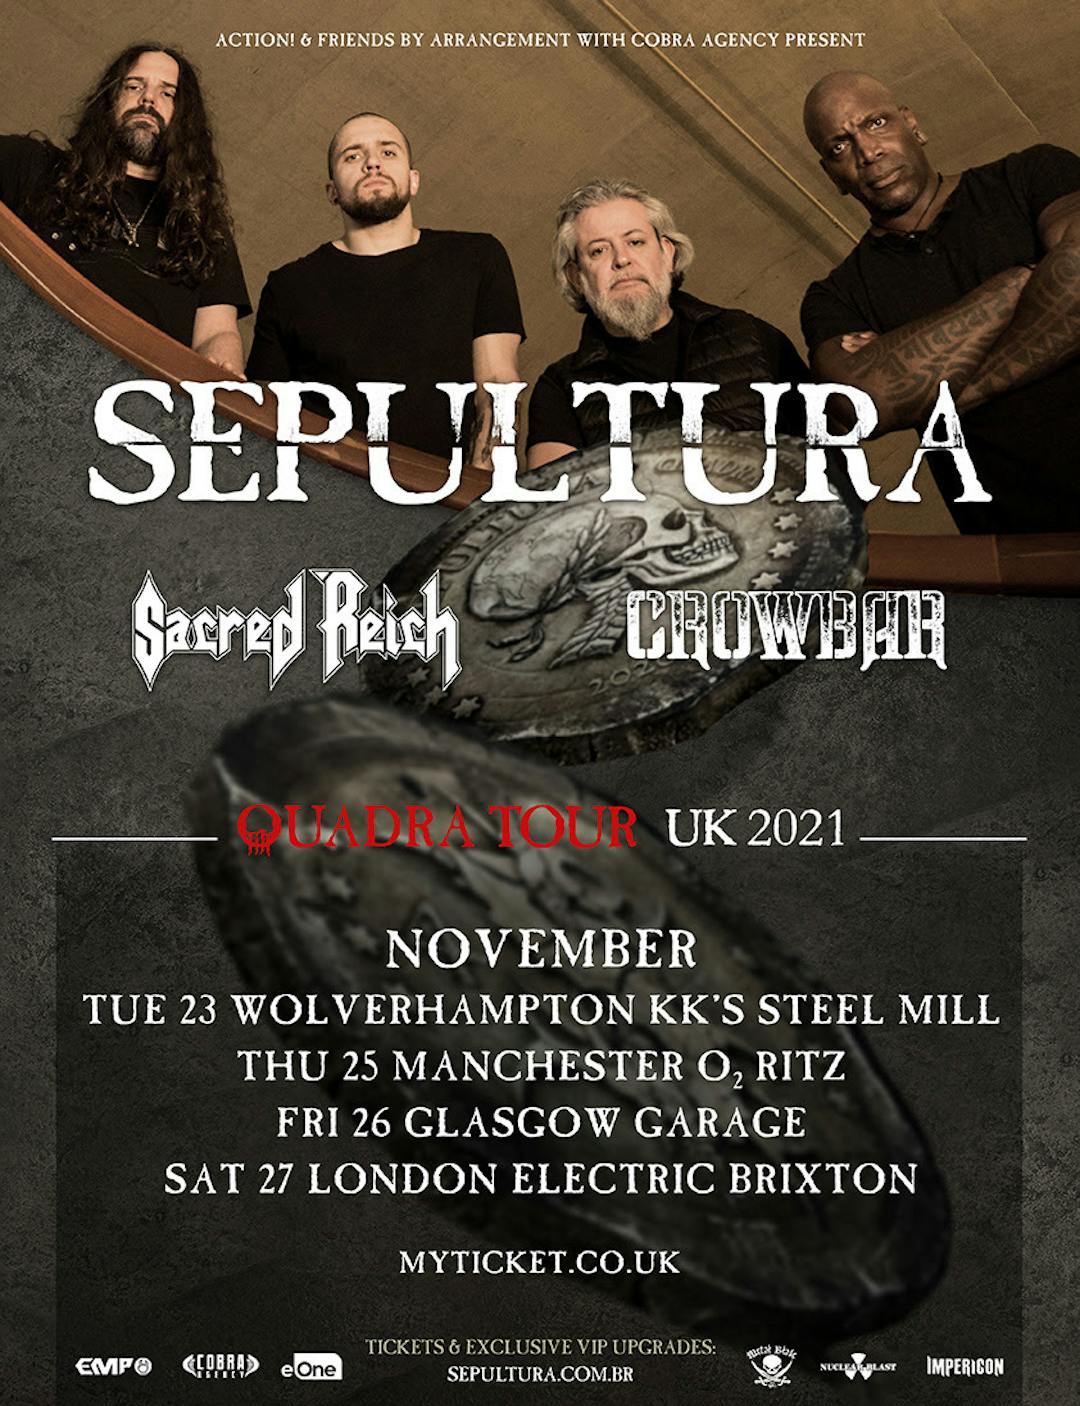 Sepultura announce UK tour with Sacred Reich and Crowbar Kerrang!